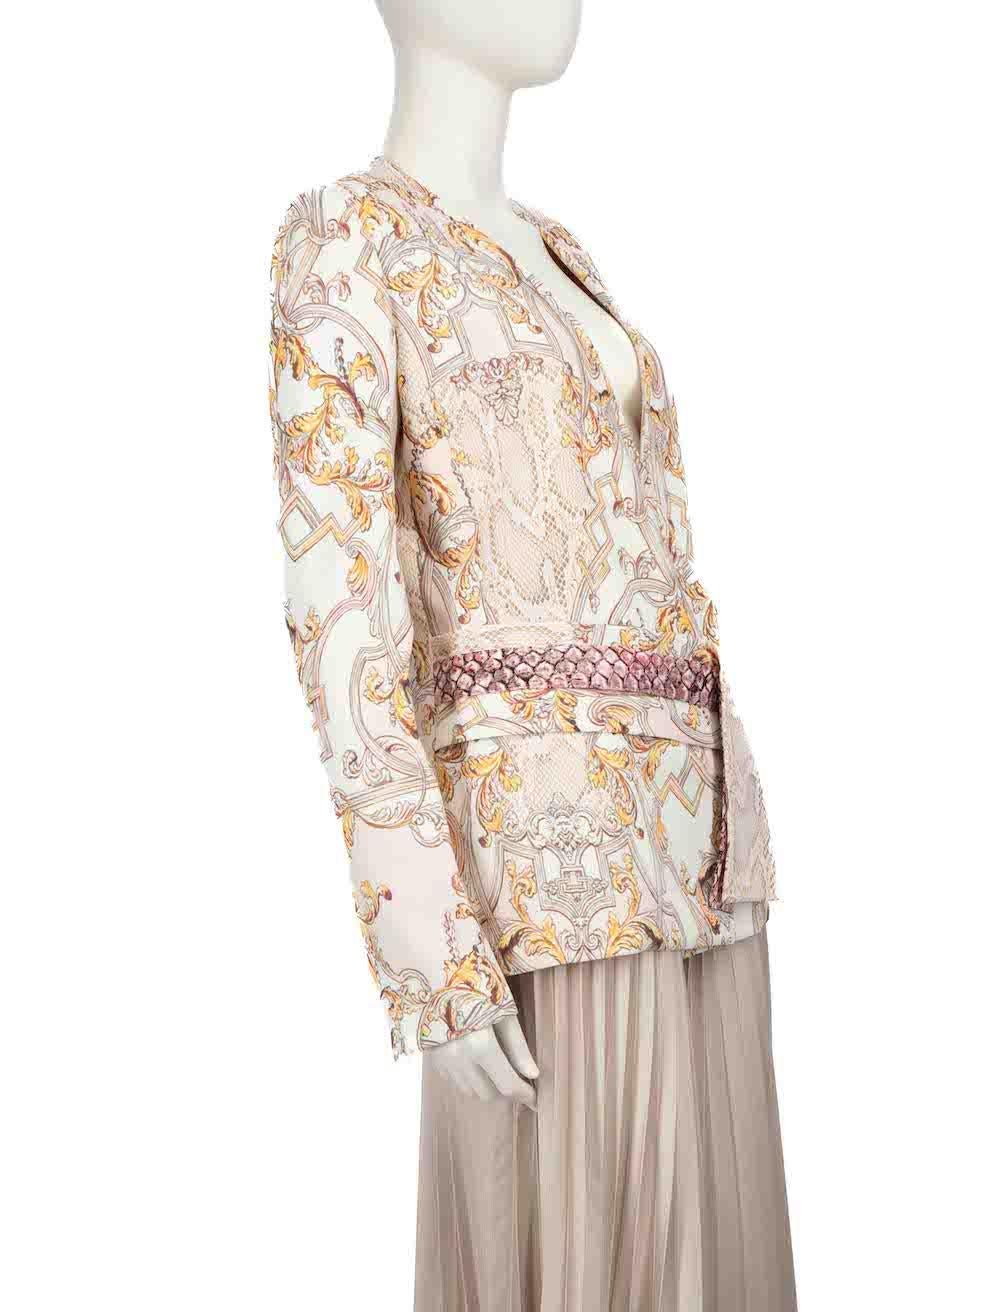 CONDITION is Very good. Hardly any visible wear to the blazer is evident on this used Just Cavalli designer resale item.
 
 
 
 Details
 
 
 Multicolour - Pink and Ecru
 
 Viscose
 
 Mid length blazer
 
 Snakeskin baroque print pattern
 
 Front snap